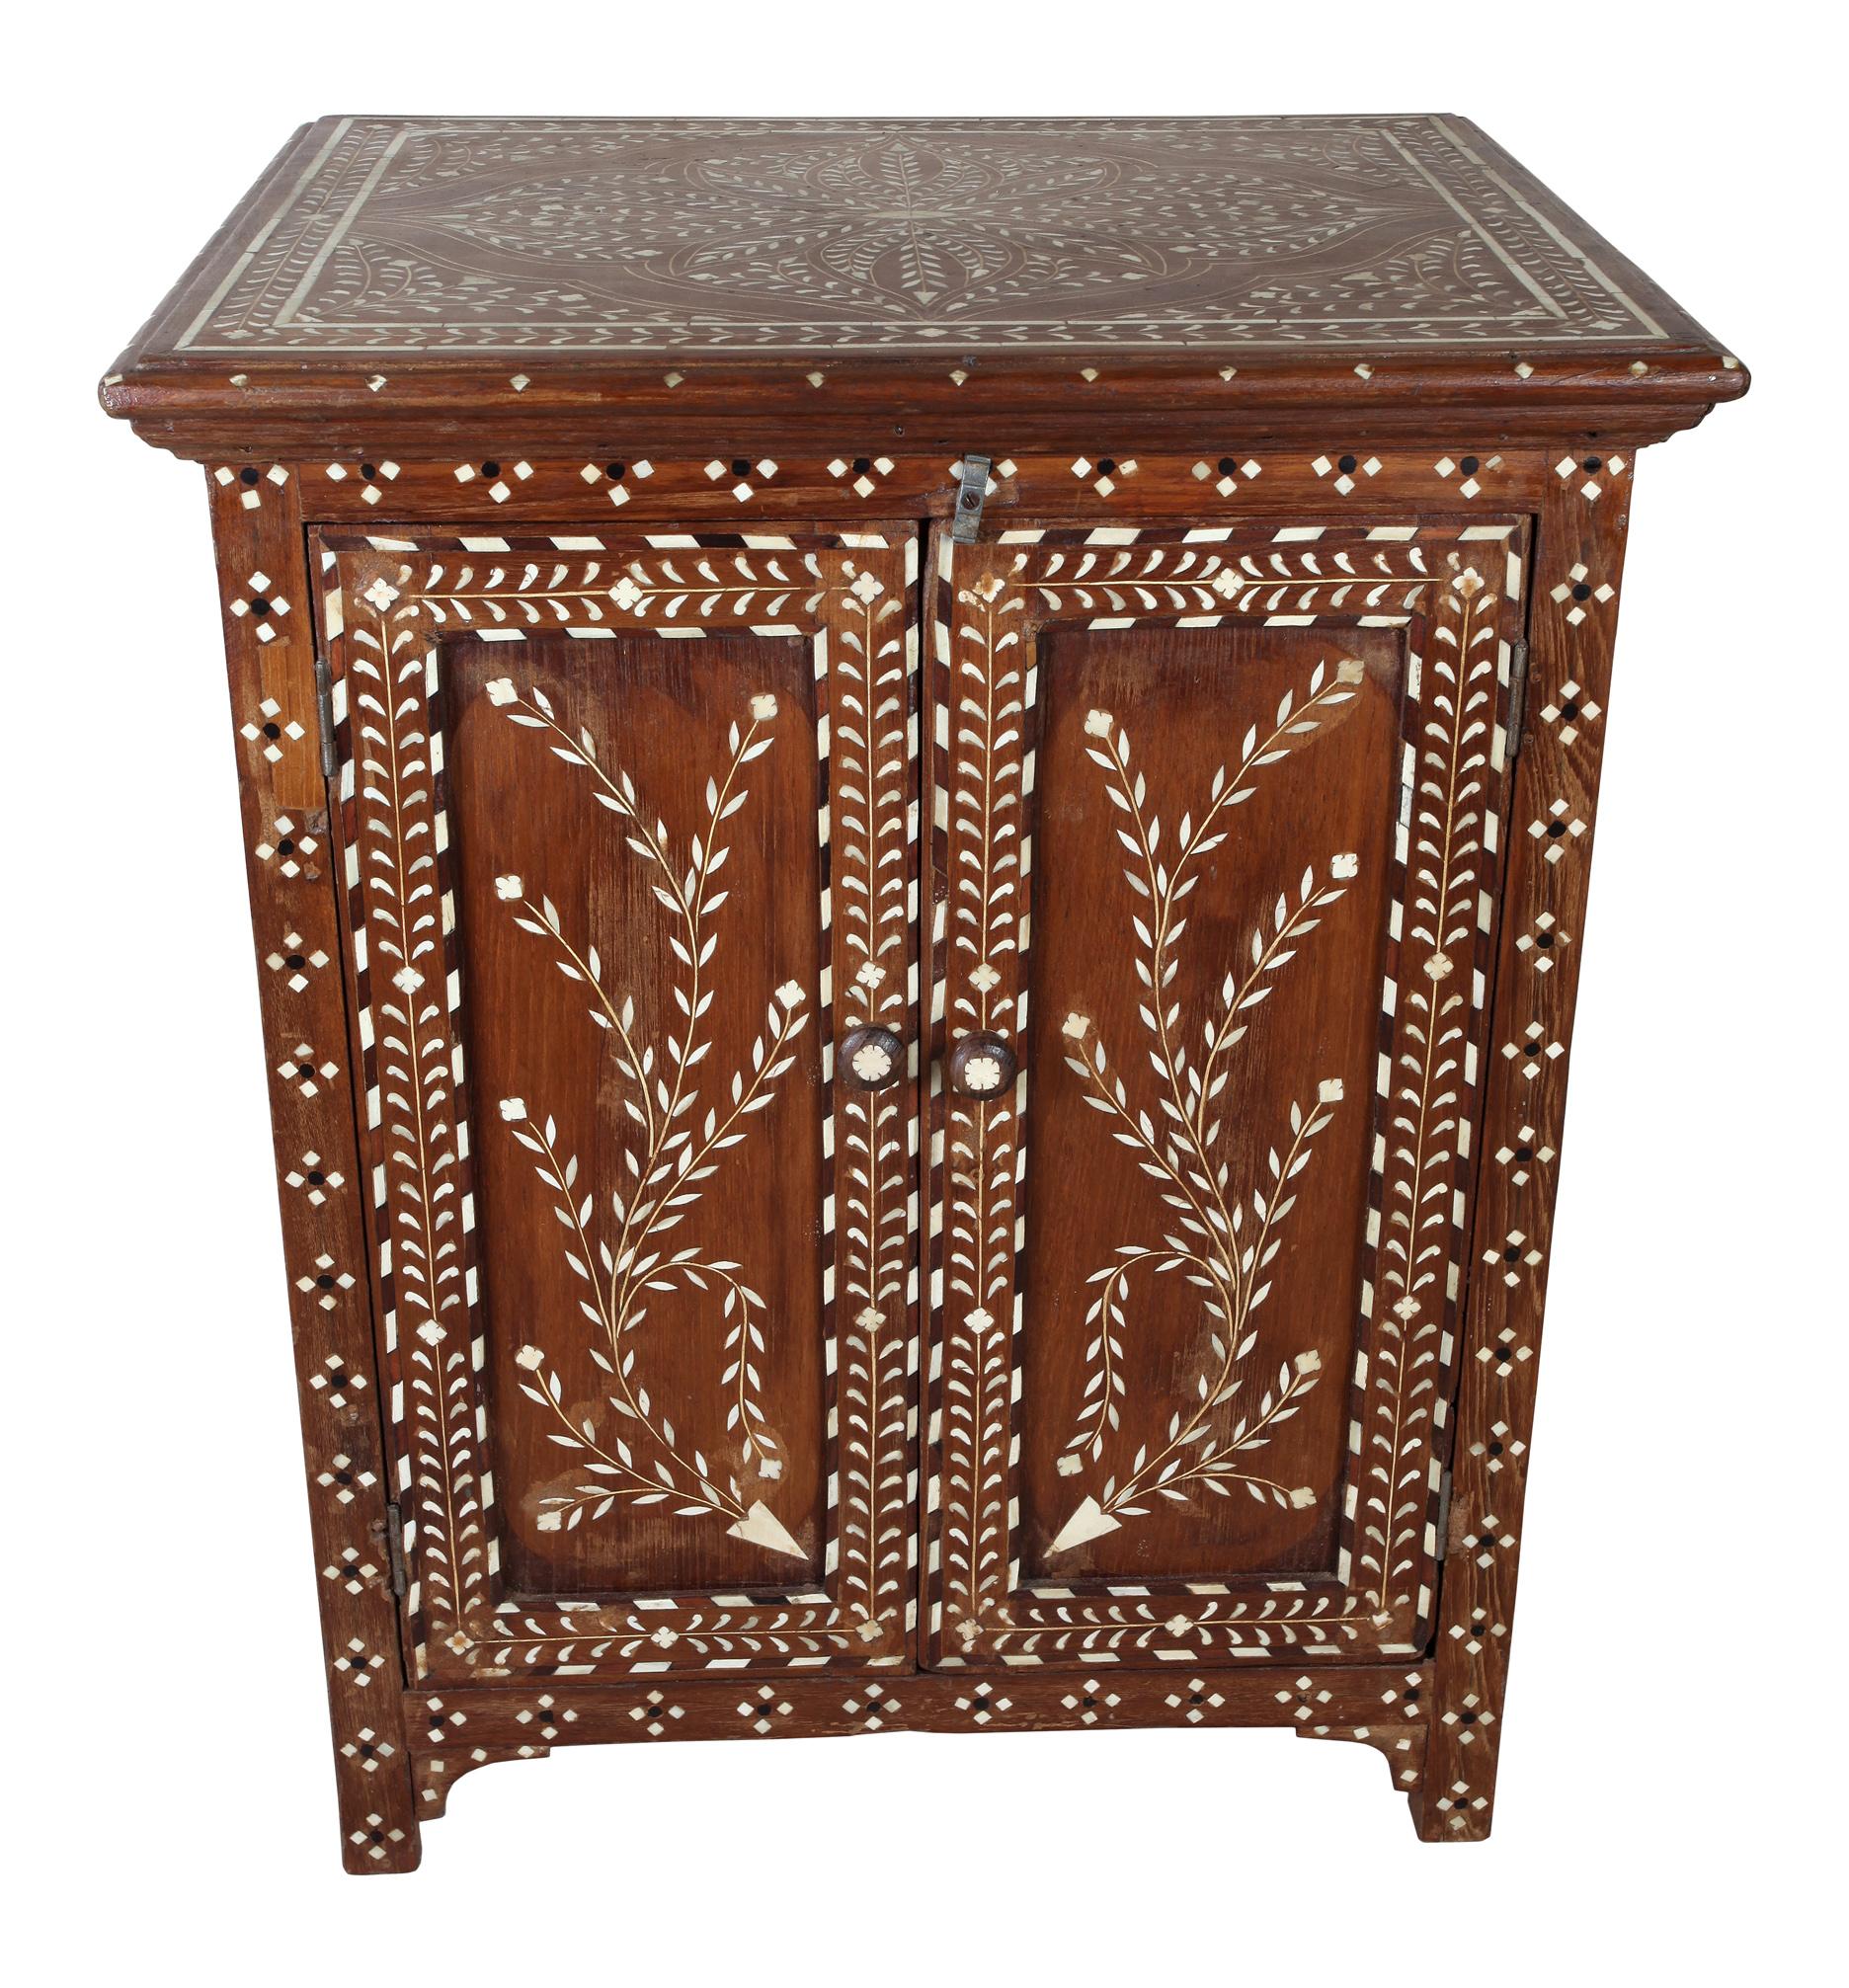 Teak cabinet with bone inlay in a very intricate pattern. Incredible, fine workmanship. Interior shelves, India, mid-1900s.  Inlay along side borders as well.  interior shelves and cubbies.  